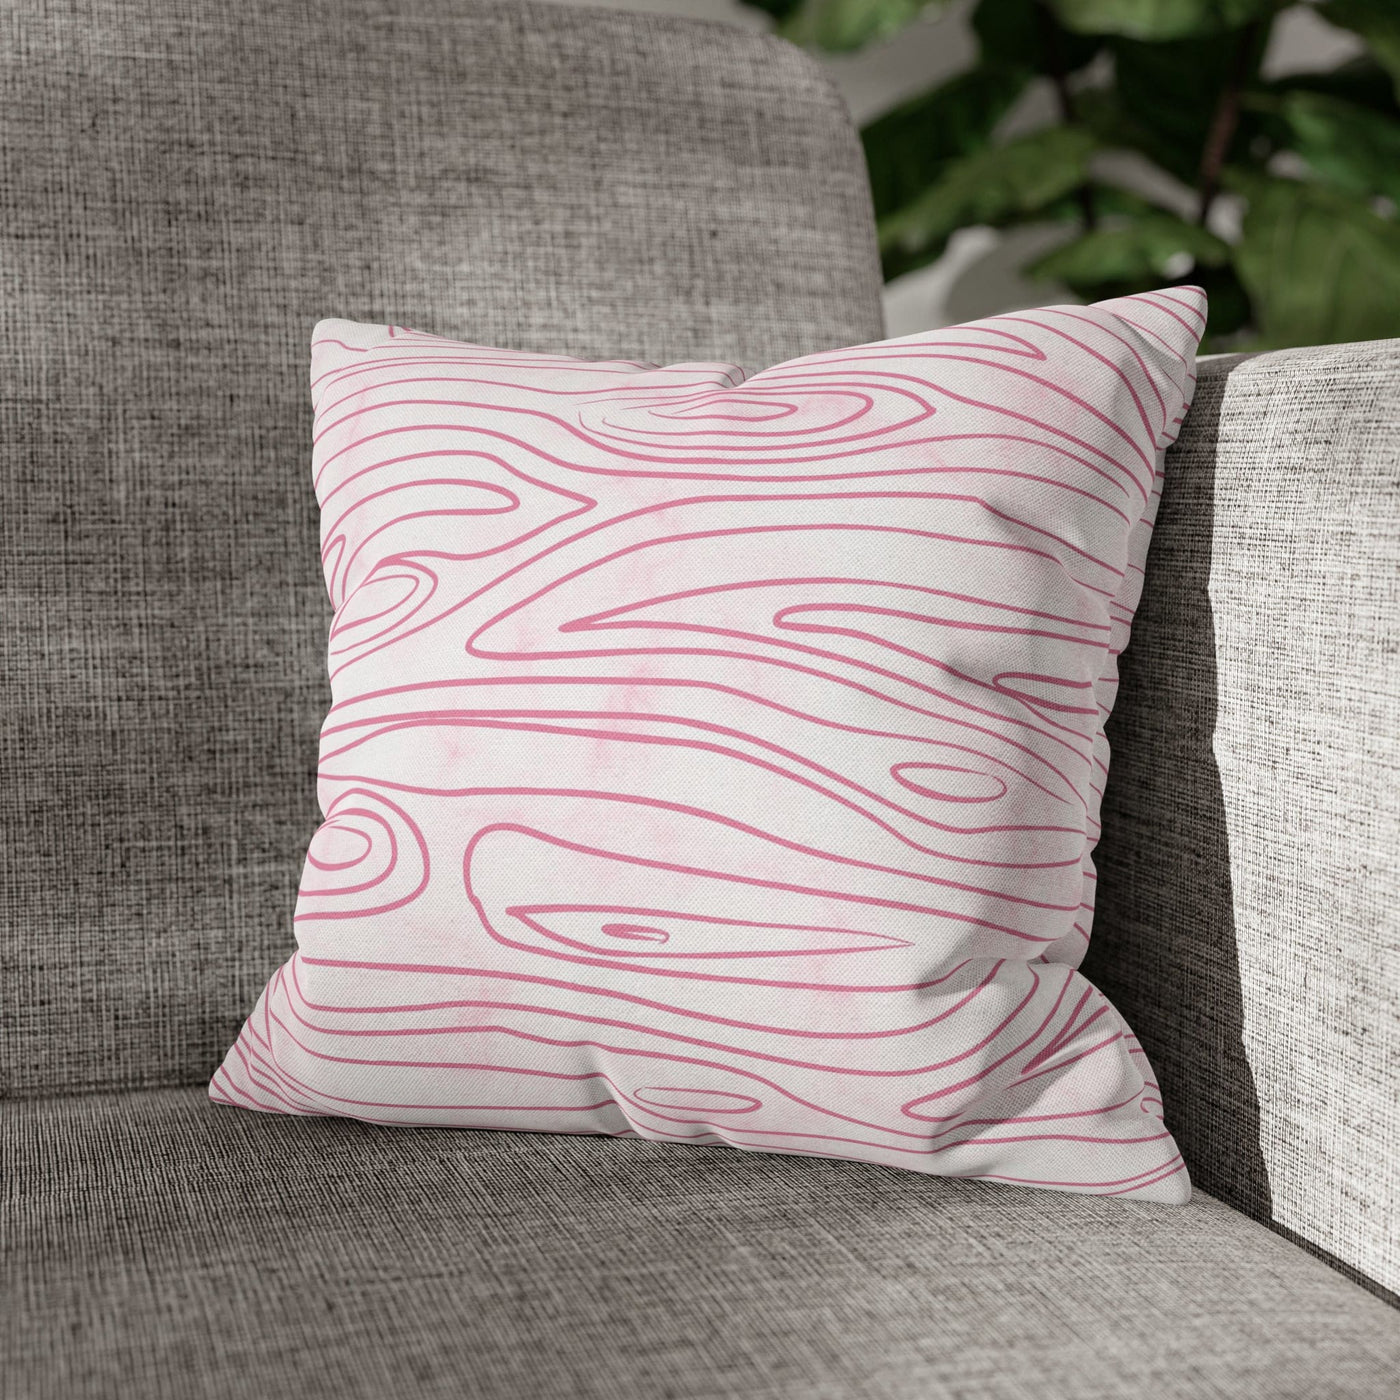 Decorative Throw Pillow Covers With Zipper - Set Of 2 Pink Line Art Sketch